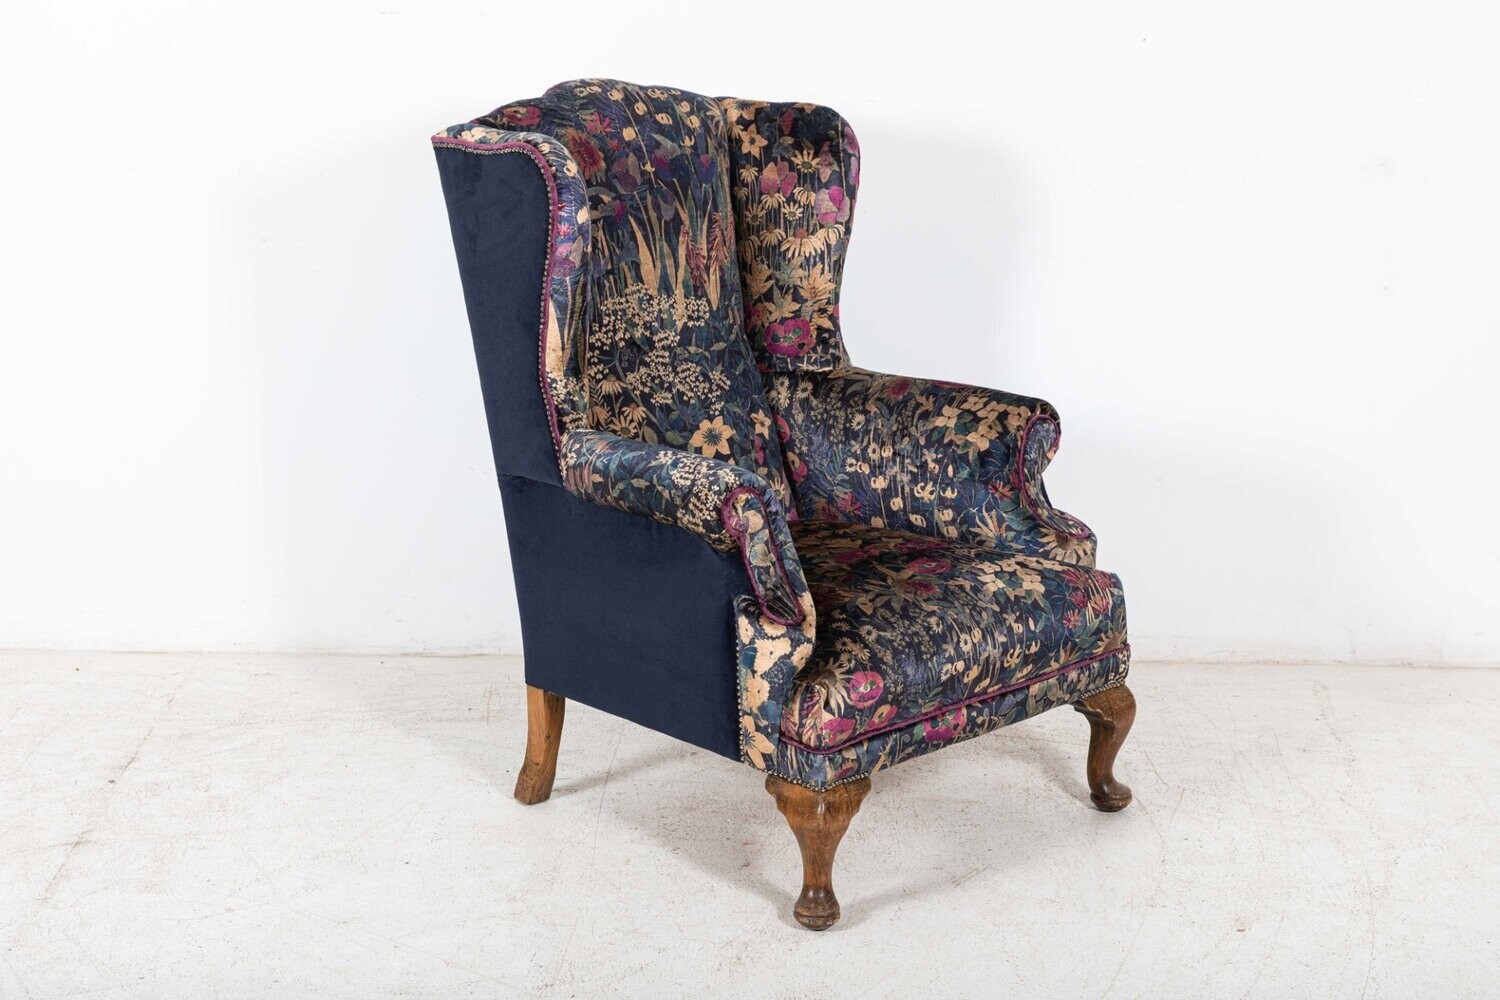 19thC English Wingback Armchair Re-upholstered in Liberty